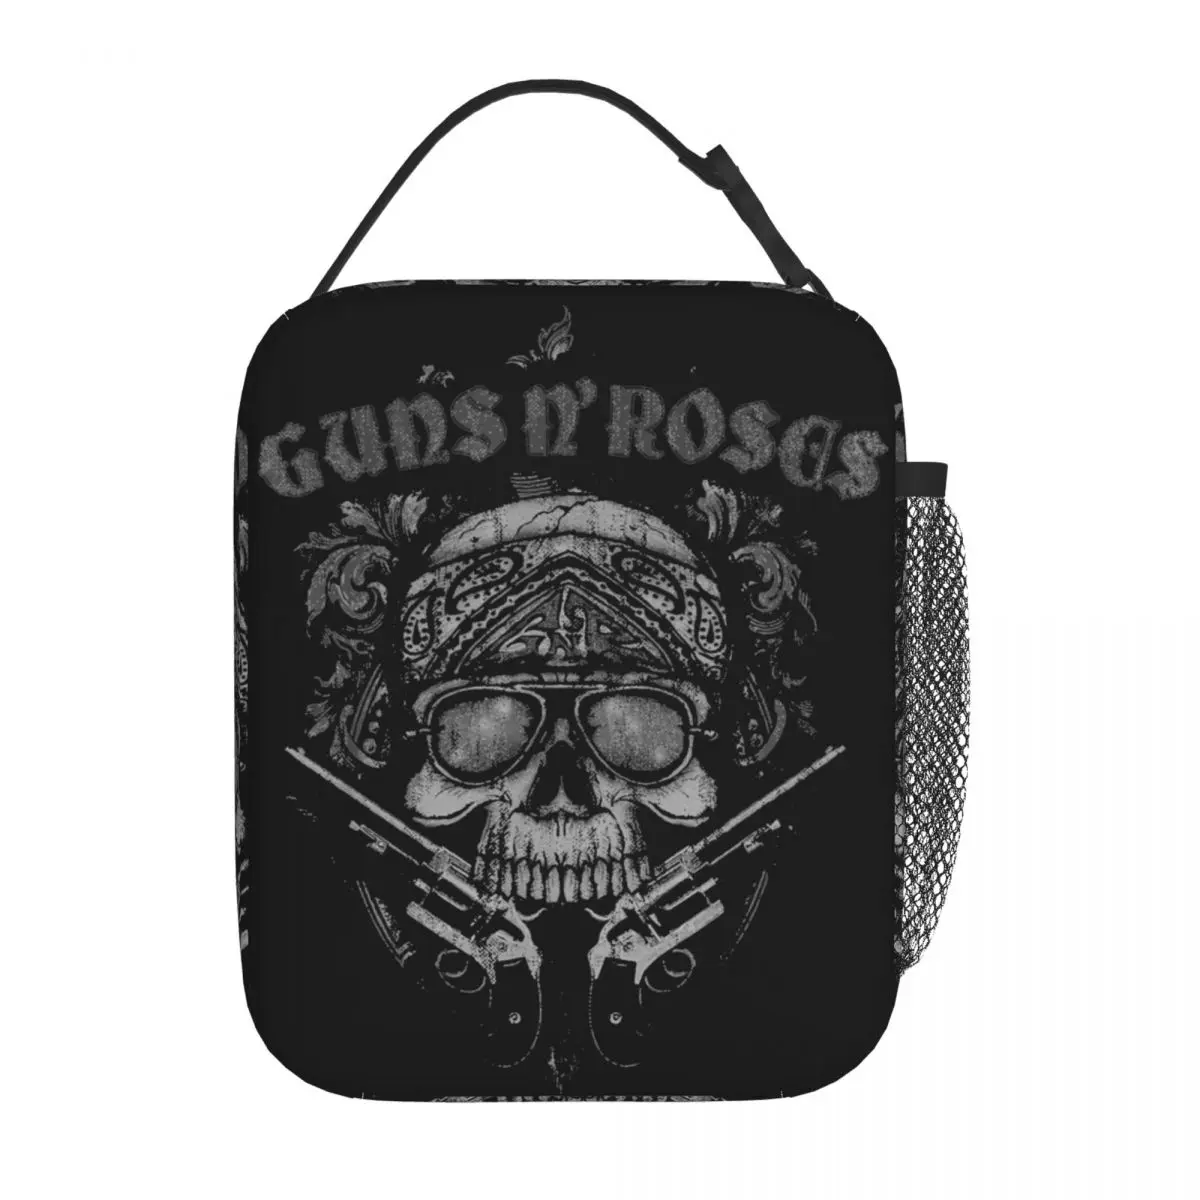 

Guns N Roses Skull Insulated Lunch Bags High Capacity Lunch Container Thermal Bag Lunch Box Tote College Outdoor Food Bag